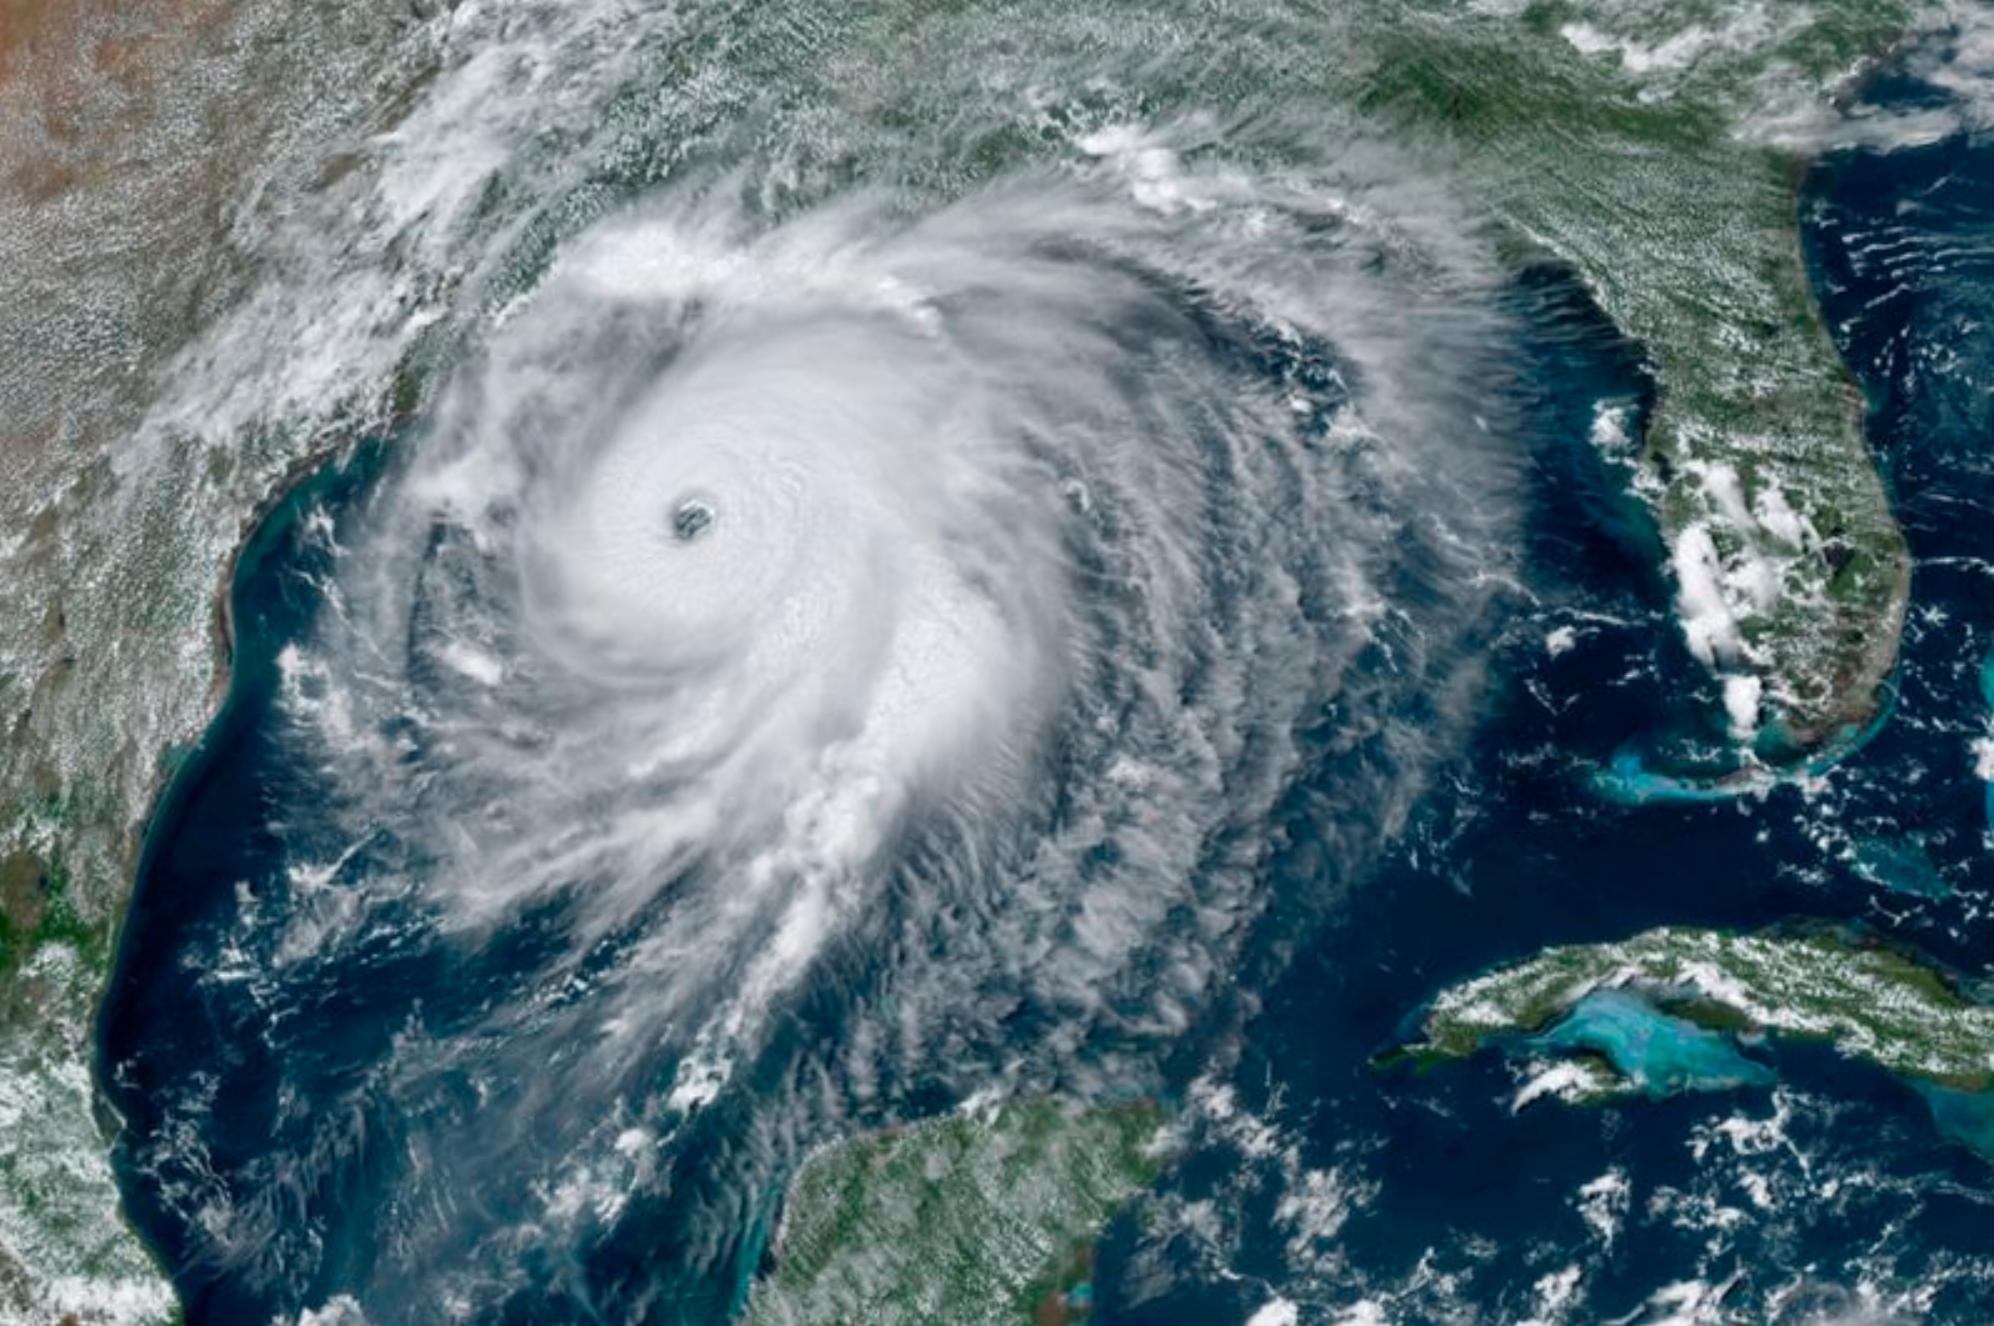 This GOES-16 GeoColor satellite image taken Wednesday, 26 August 2020, at 2:40 p.m. EDT., and provided by NOAA, shows Hurricane Laura over the Gulf of Mexico. Hurricane Laura strengthened Wednesday into “an extremely dangerous Category 4 hurricane," The National Hurricane Center said. Laura is expected to strike Wednesday night into Thursday morning along the Louisiana-Texas border. Photo: NOAA / AP